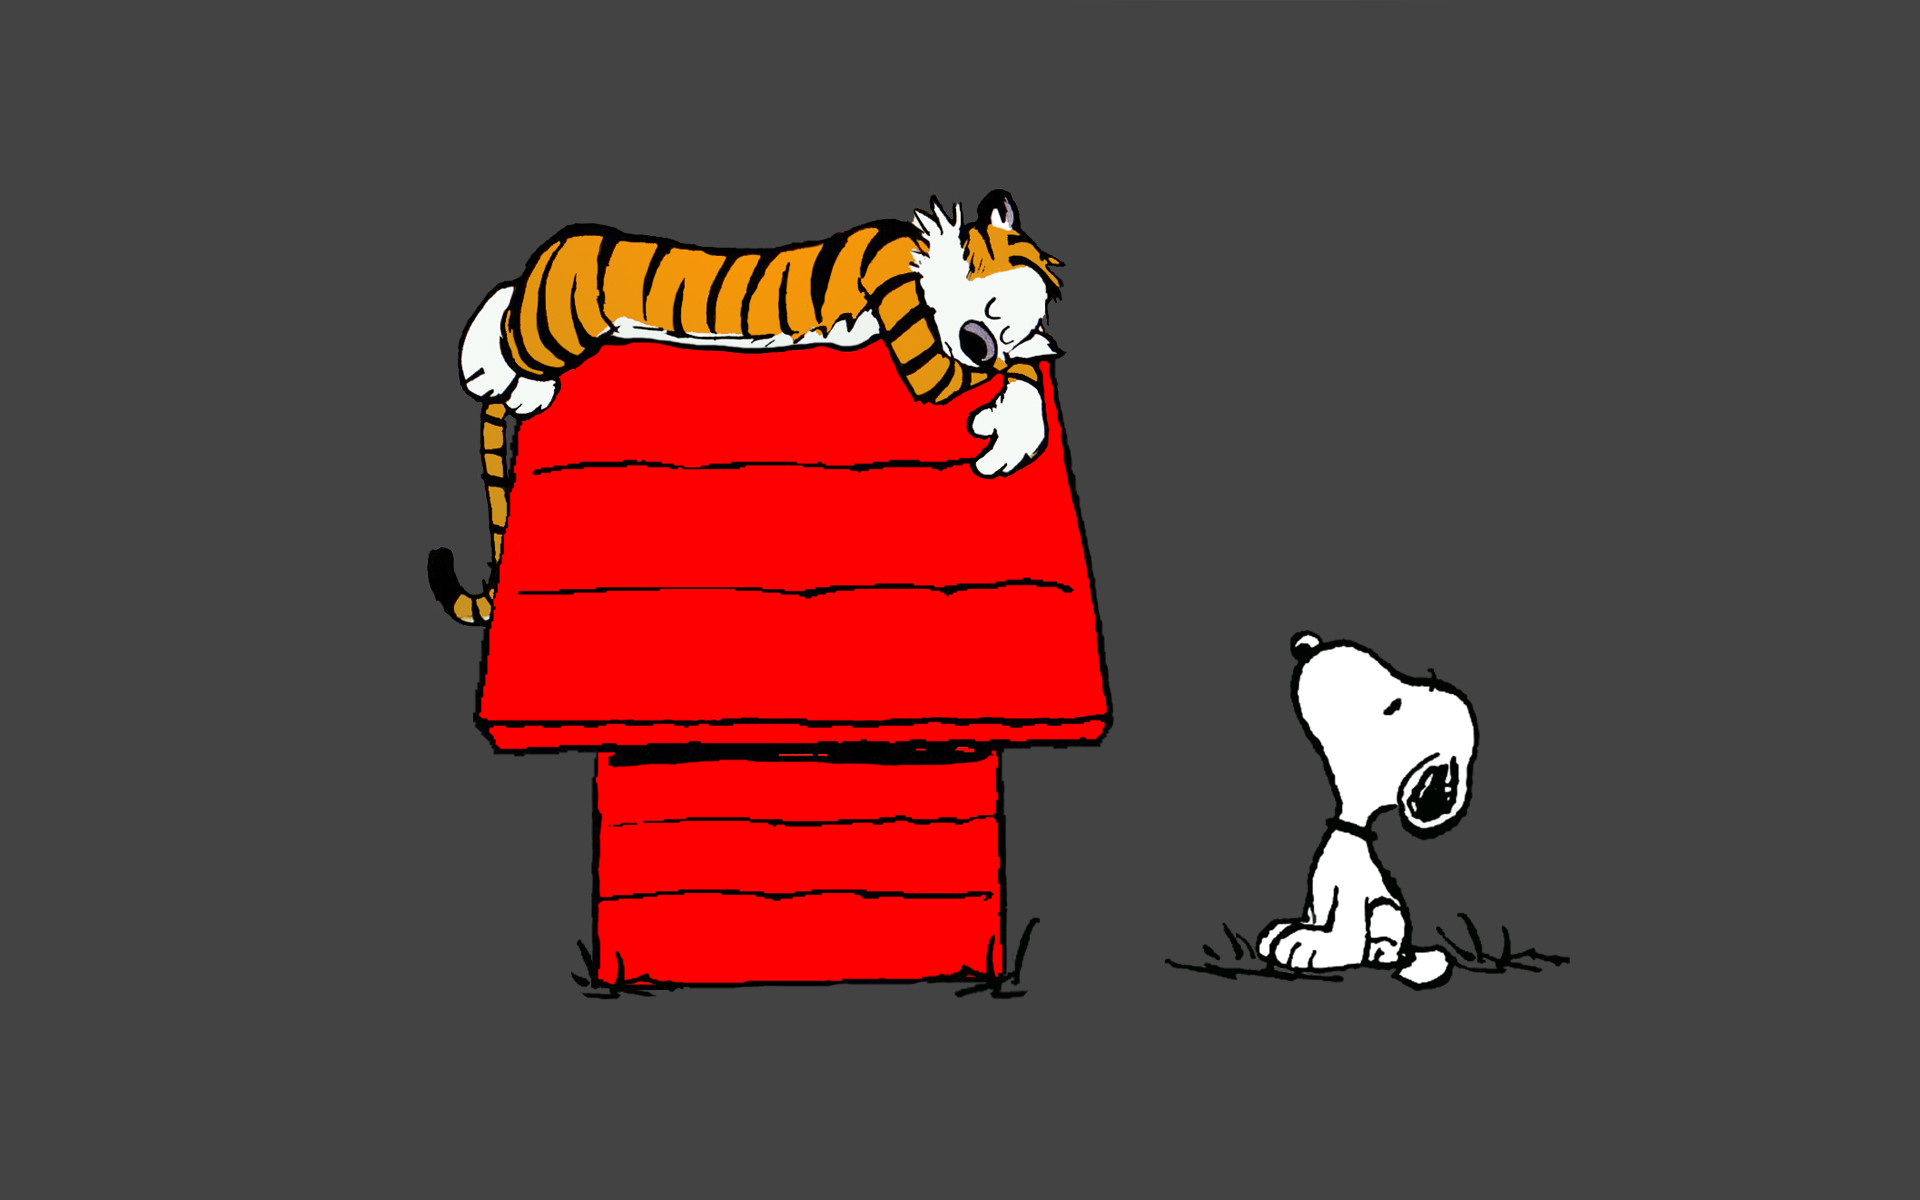 Free Download Calvin And Hobbes Snoopy Sleep Peanuts Tiger Wallpaper 1920x1200 1920x1200 For Your Desktop Mobile Tablet Explore 47 Calvin And Hobbes Hd Wallpaper Calvin And Hobbes Wallpapers Calvin